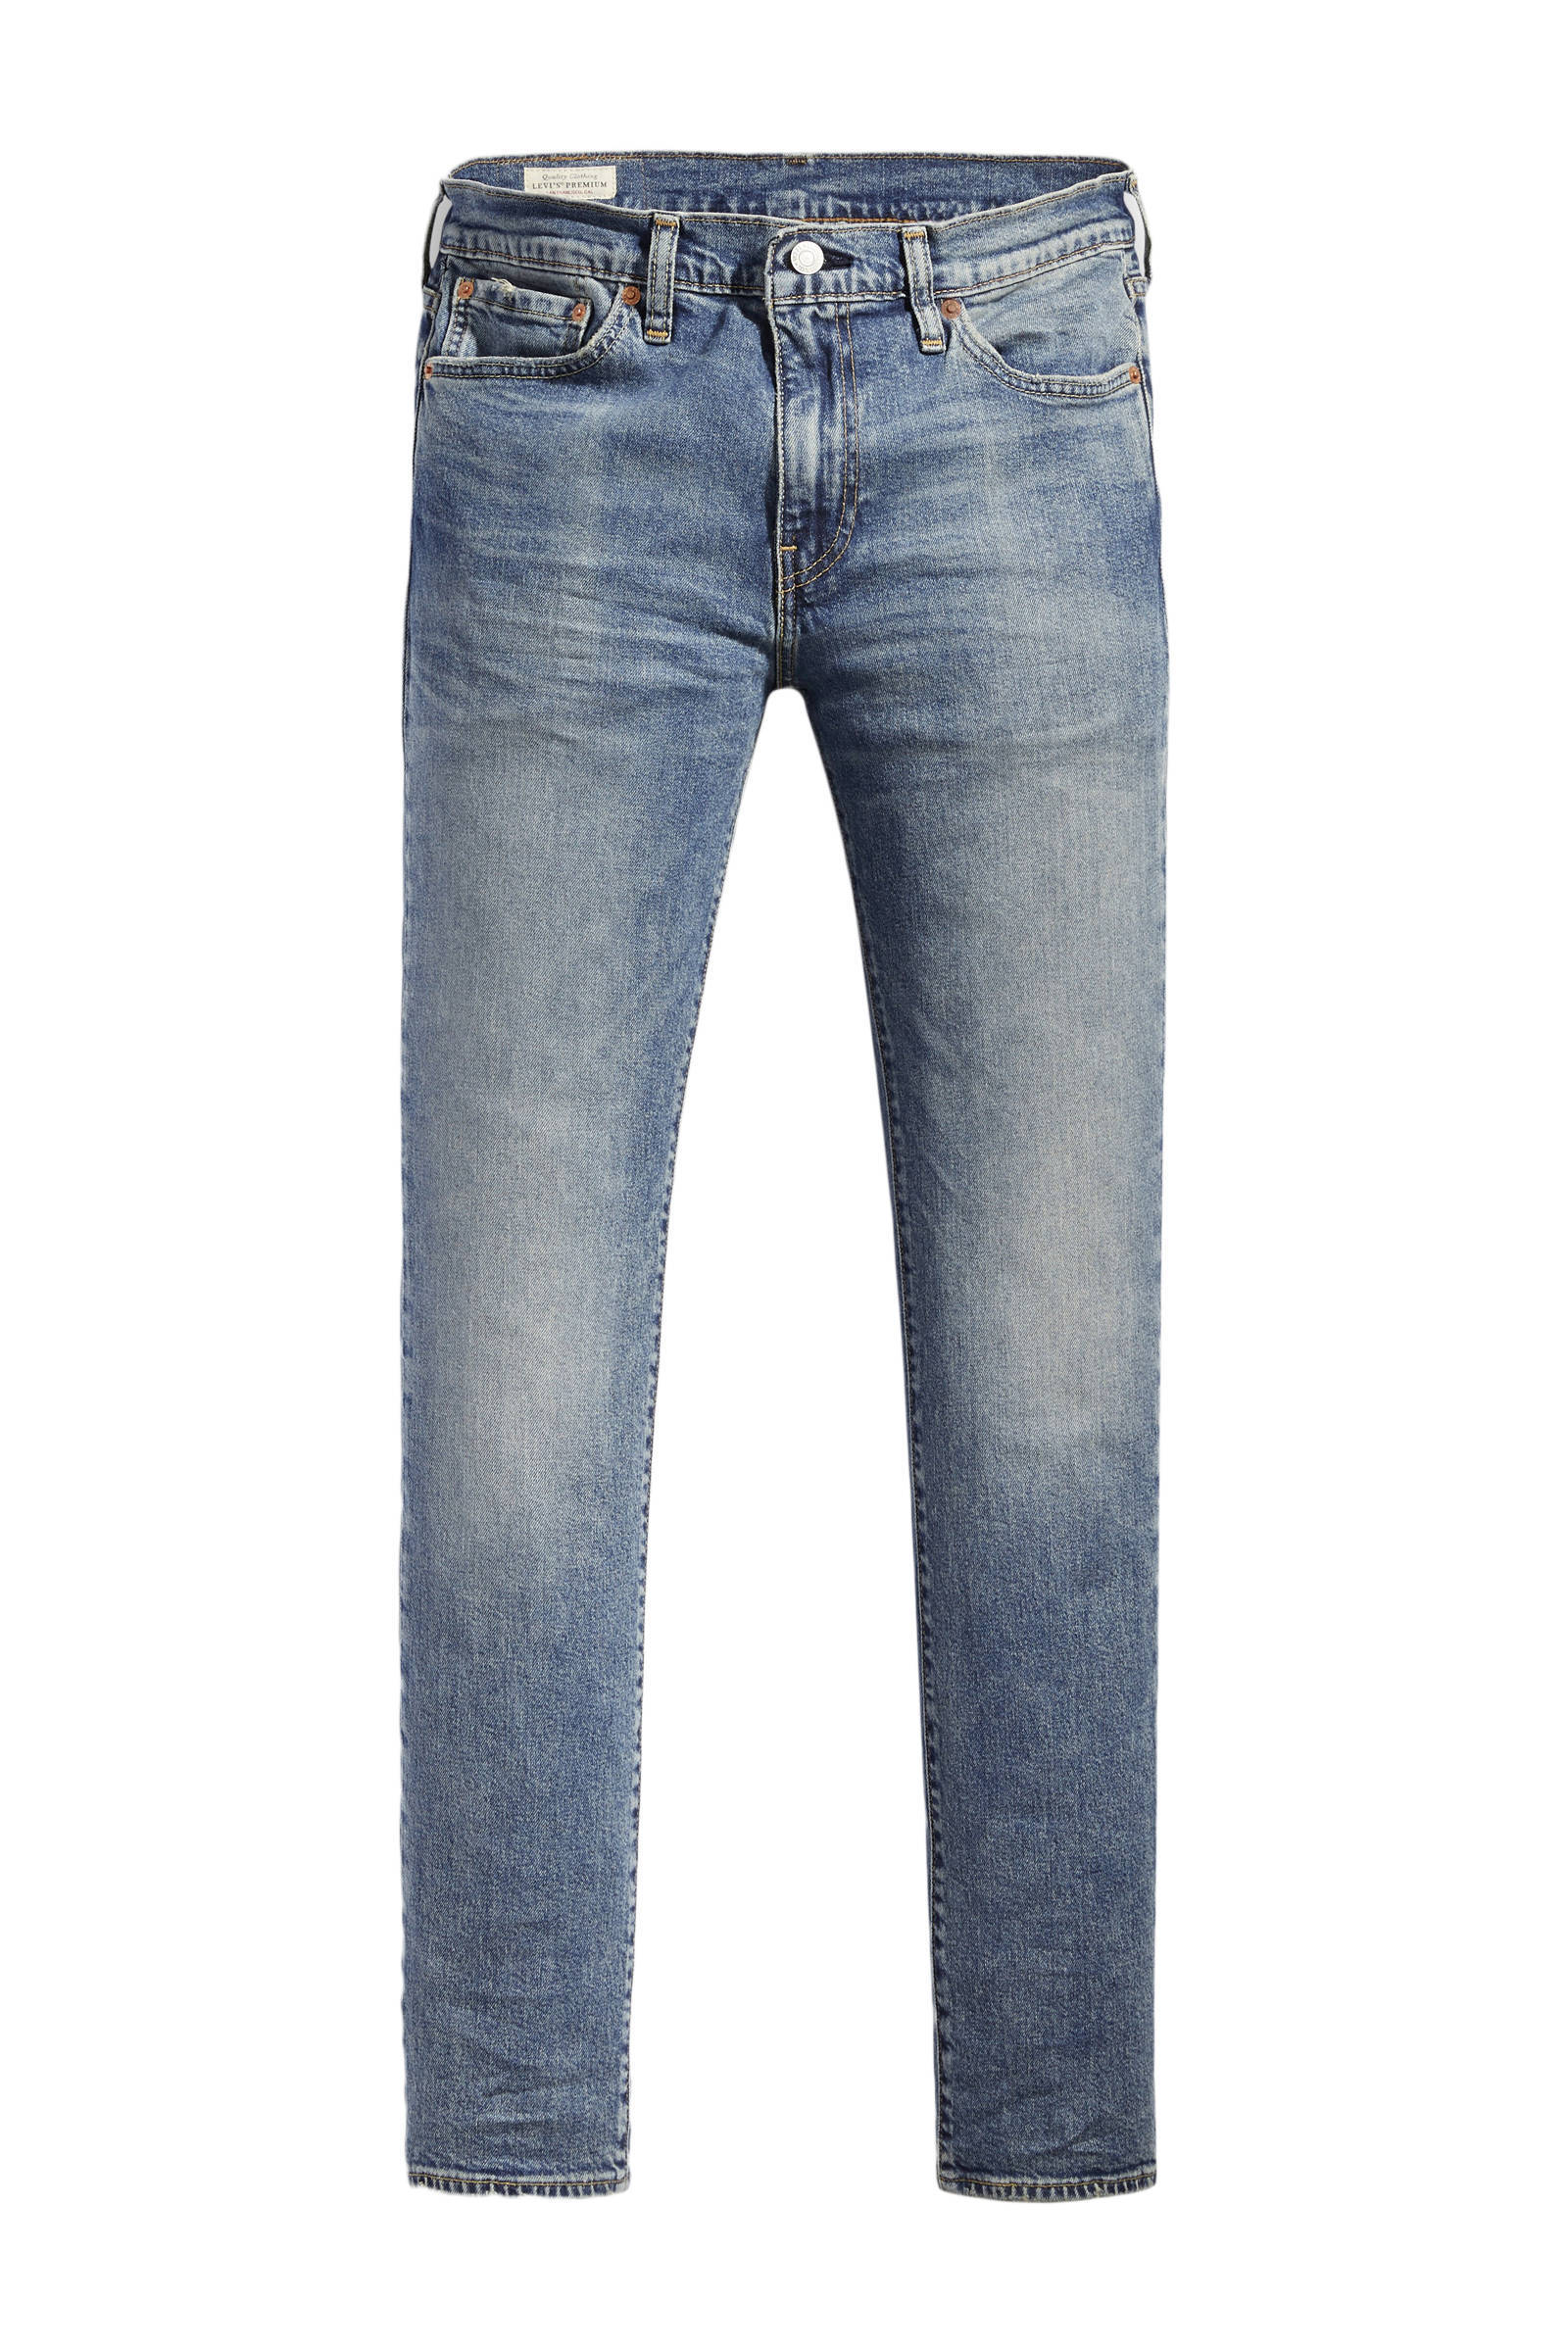 Levi's 511 slim fit jeans headed south 